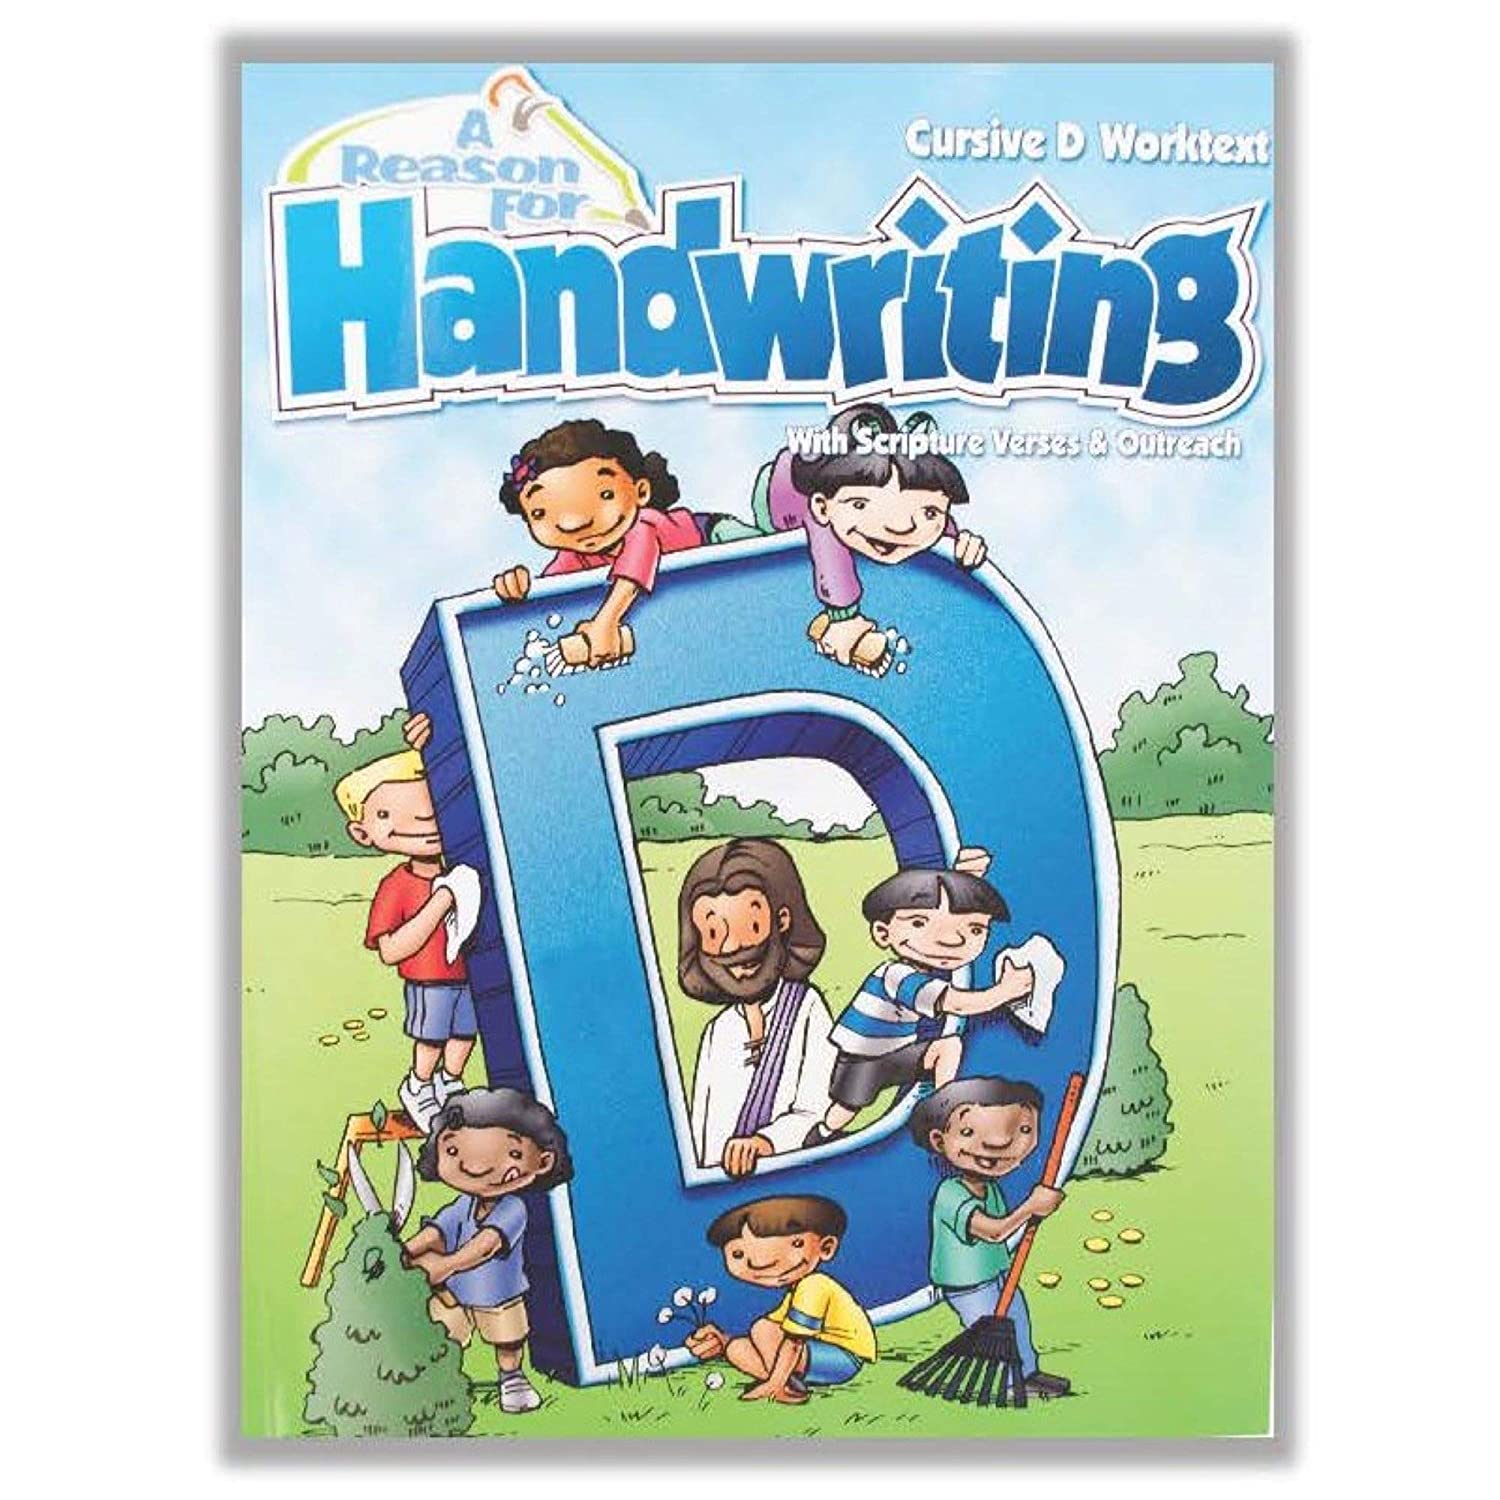 4th Grade Cursive Handwriting Workbook Level D by A Reason For - Learning Workbooks for Kids Age 8-10 - Practice Paper Books for Fourth Grader